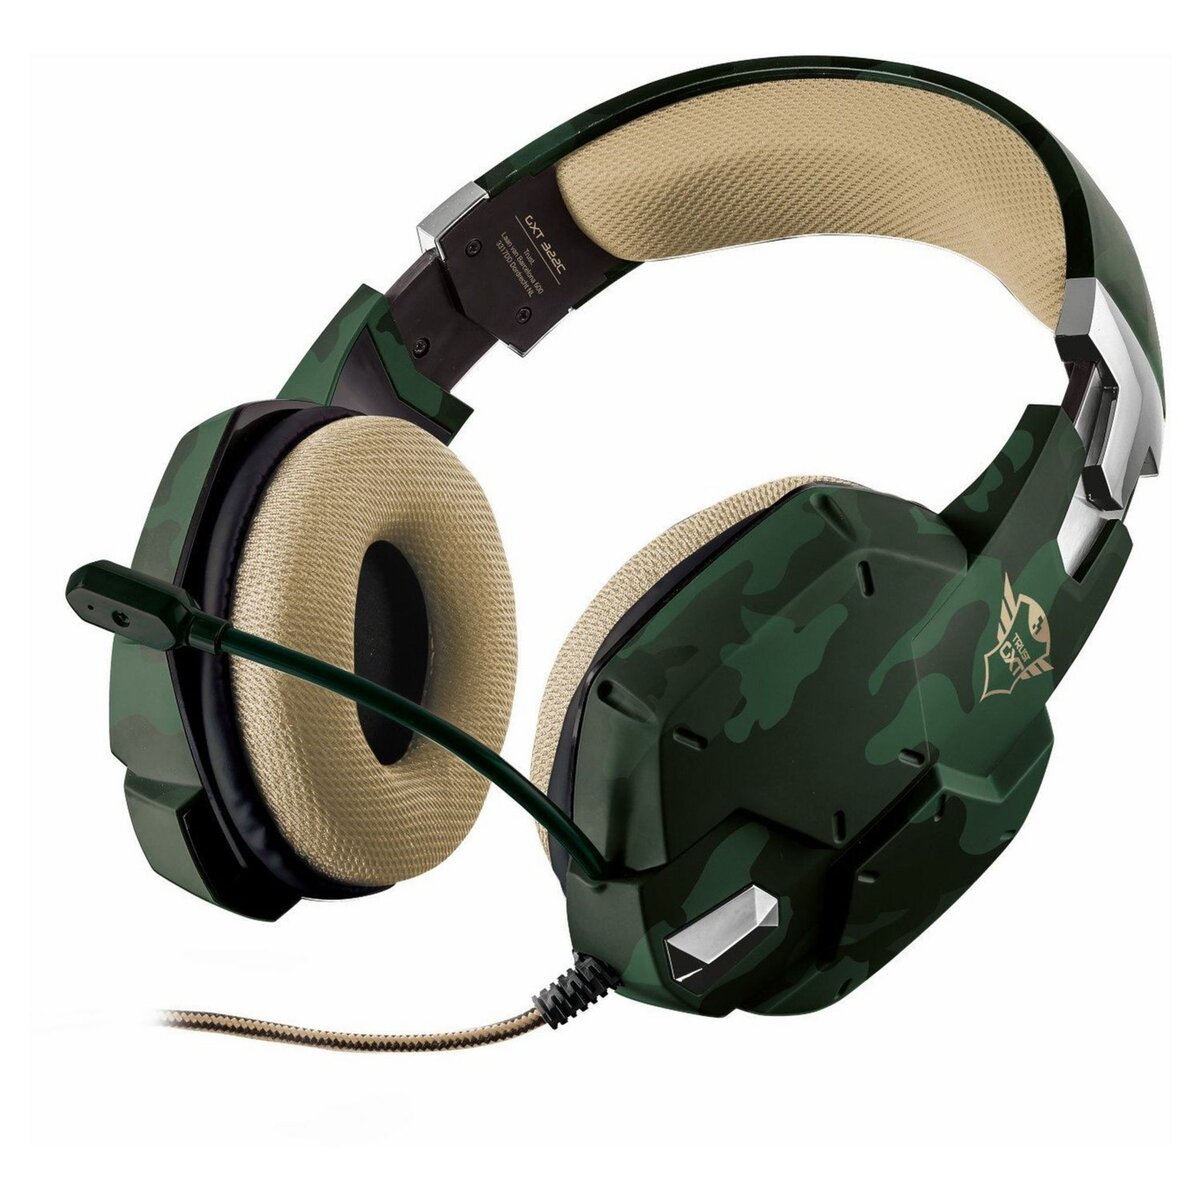 TRUST Casque gaming filaire GXT322 Vert camouflage